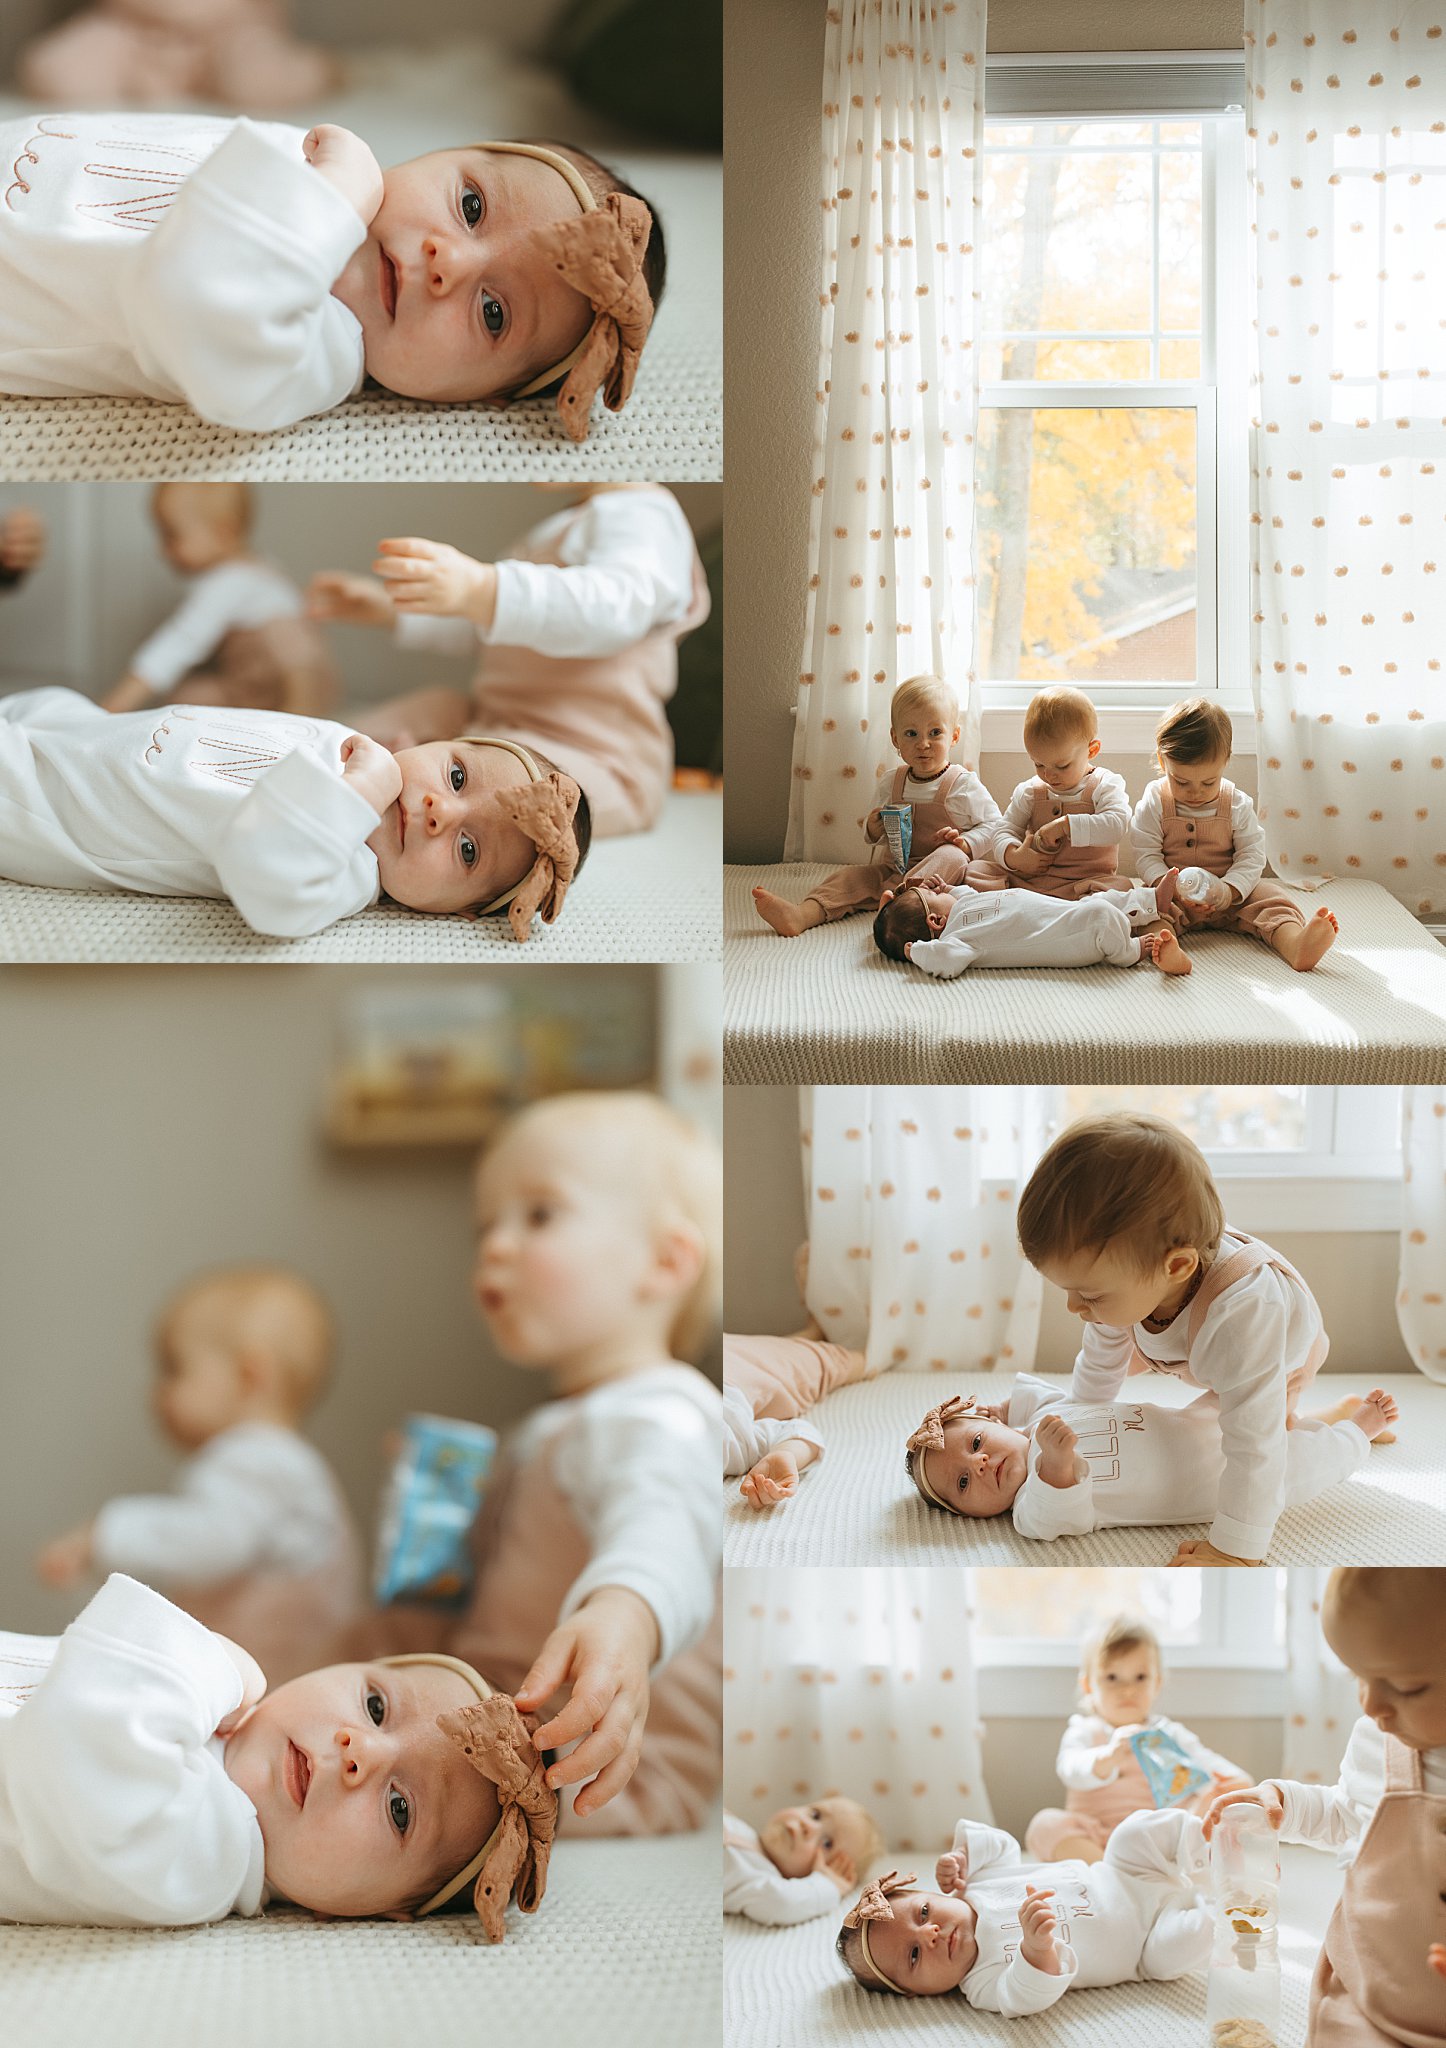 infant lays on cushions with siblings during Newborn Lifestyle Session